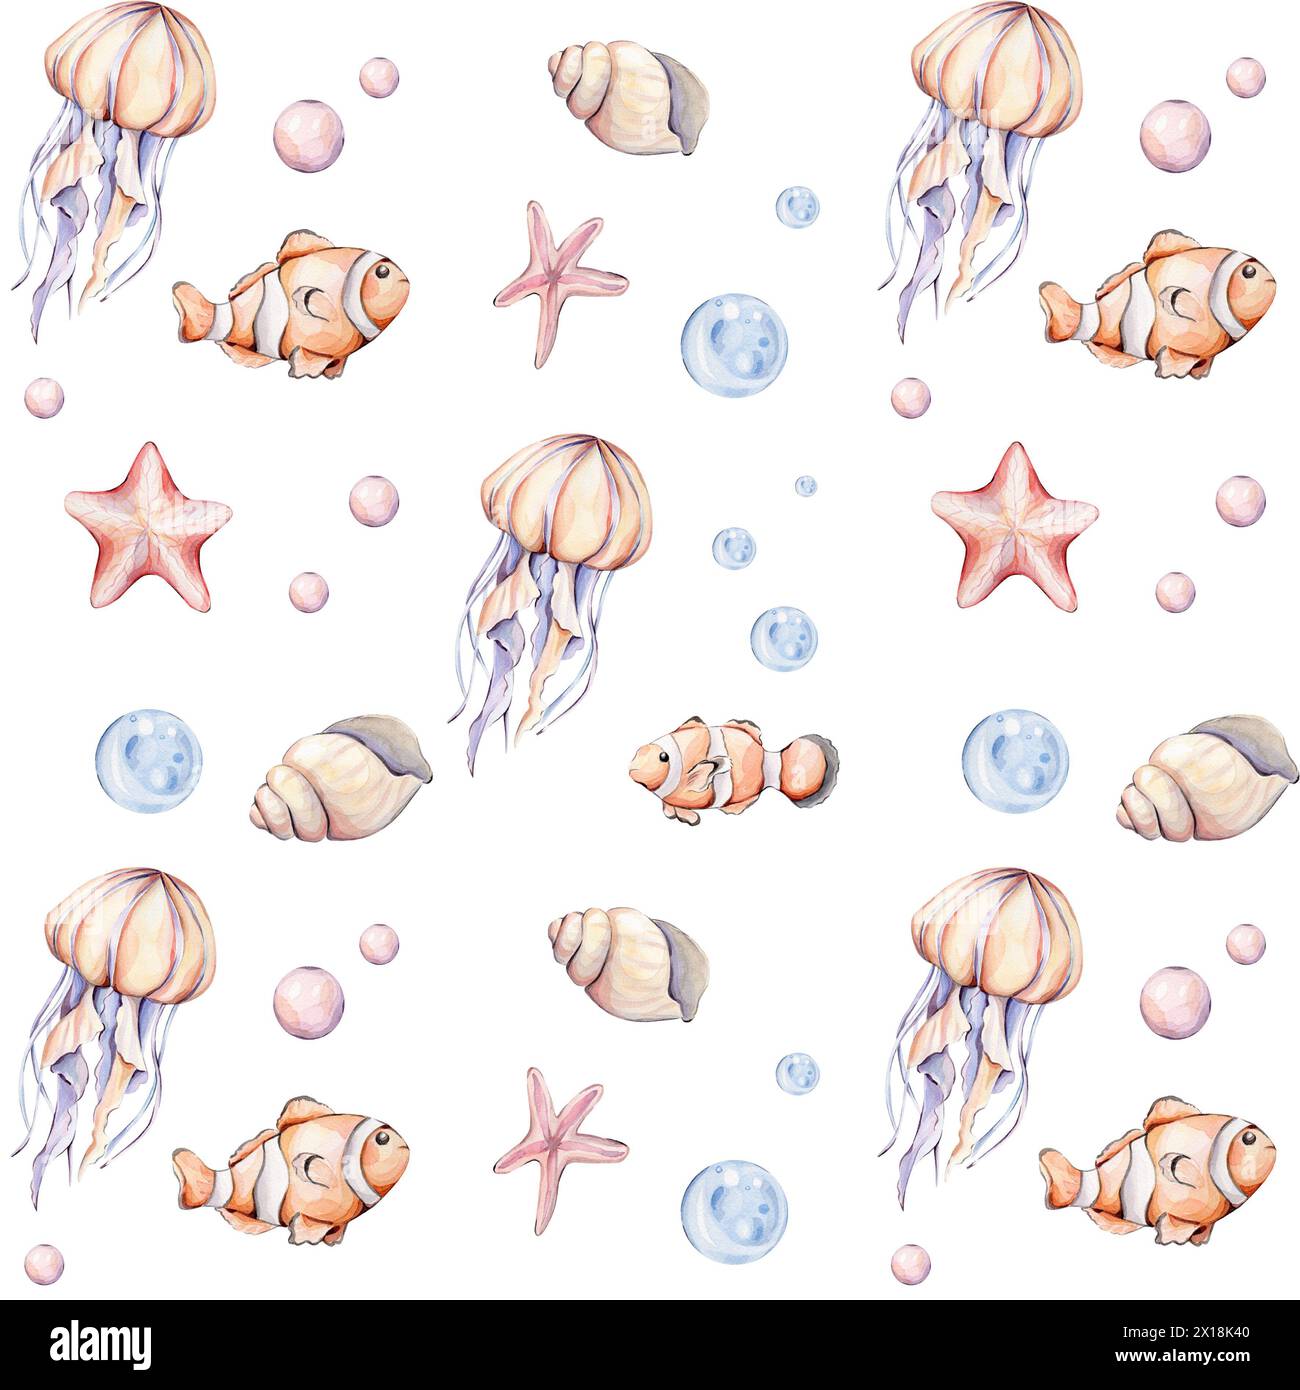 Watercolor seamless pattern with jelly fish, star fish and fish. Stock Photo